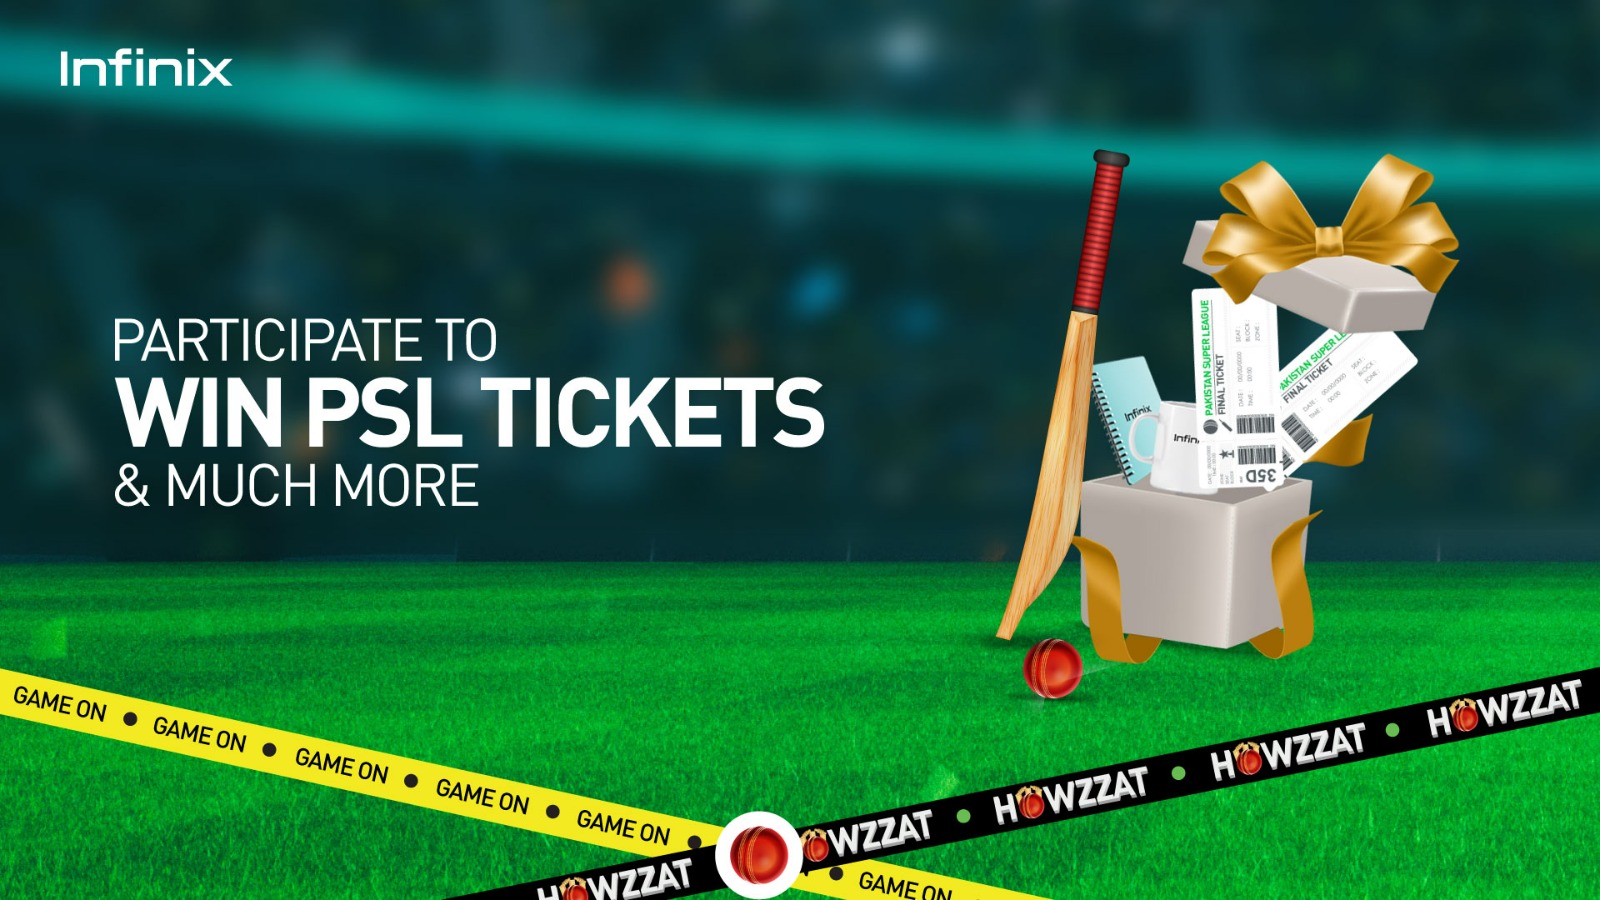 Infinix invites all to predict PSL match winners and get a chance to win PSL 8 tickets!